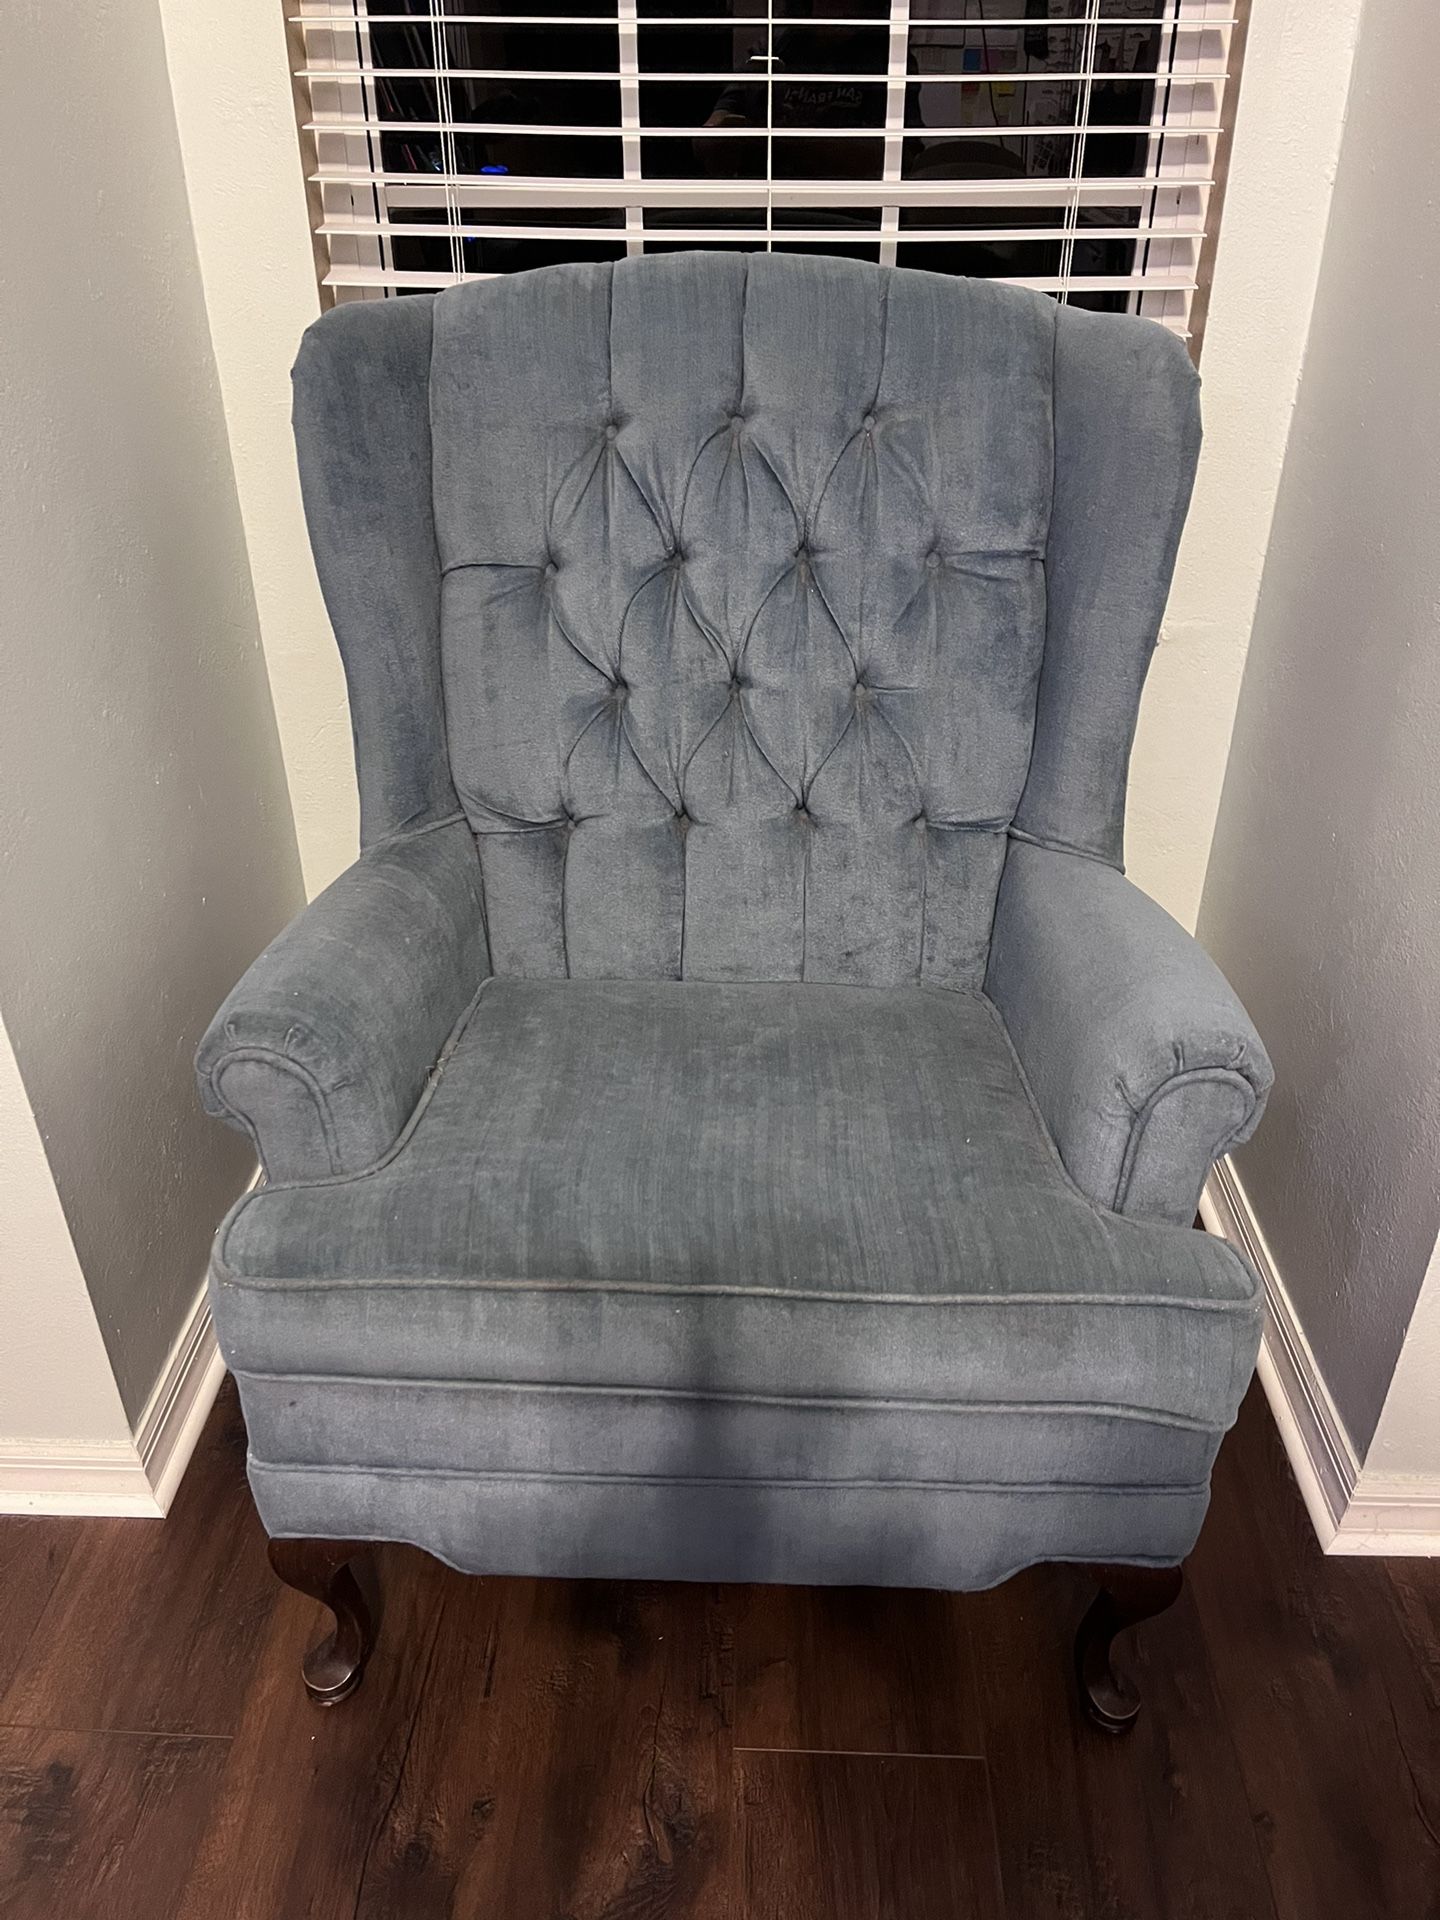 Vintage Queen Anne style wing back chair